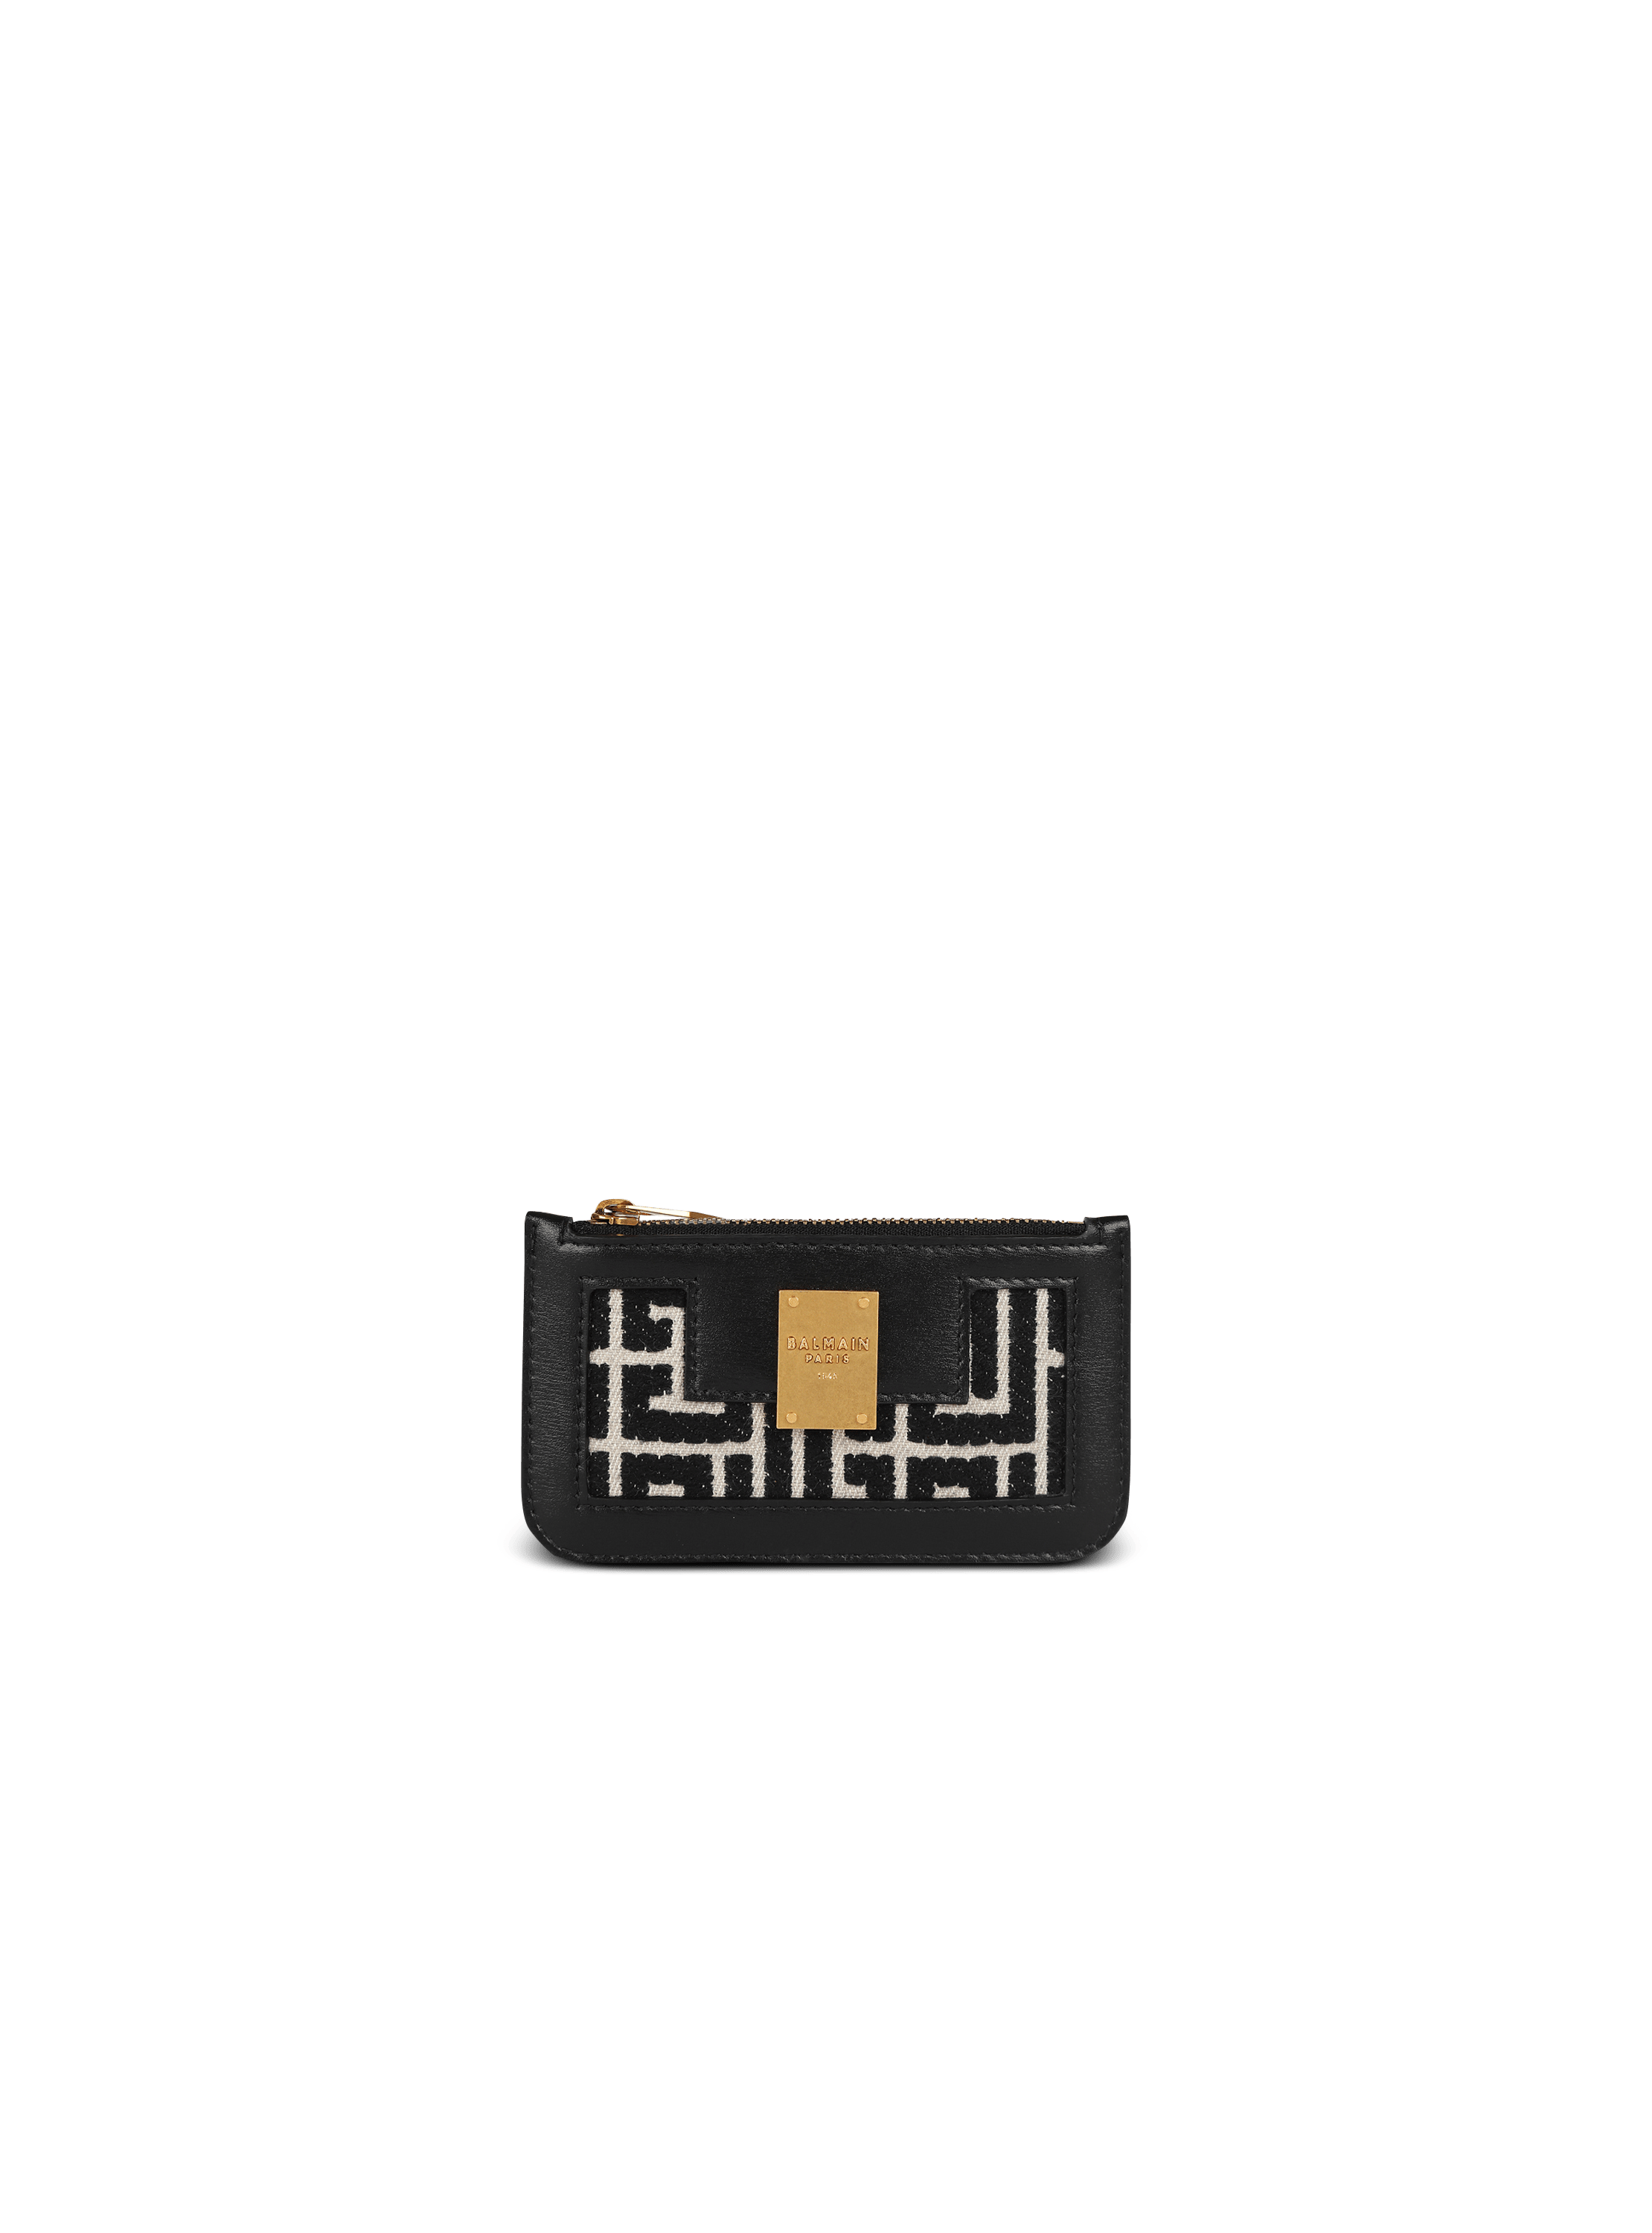 Bicolor jacquard 1945 card holder with leather panels